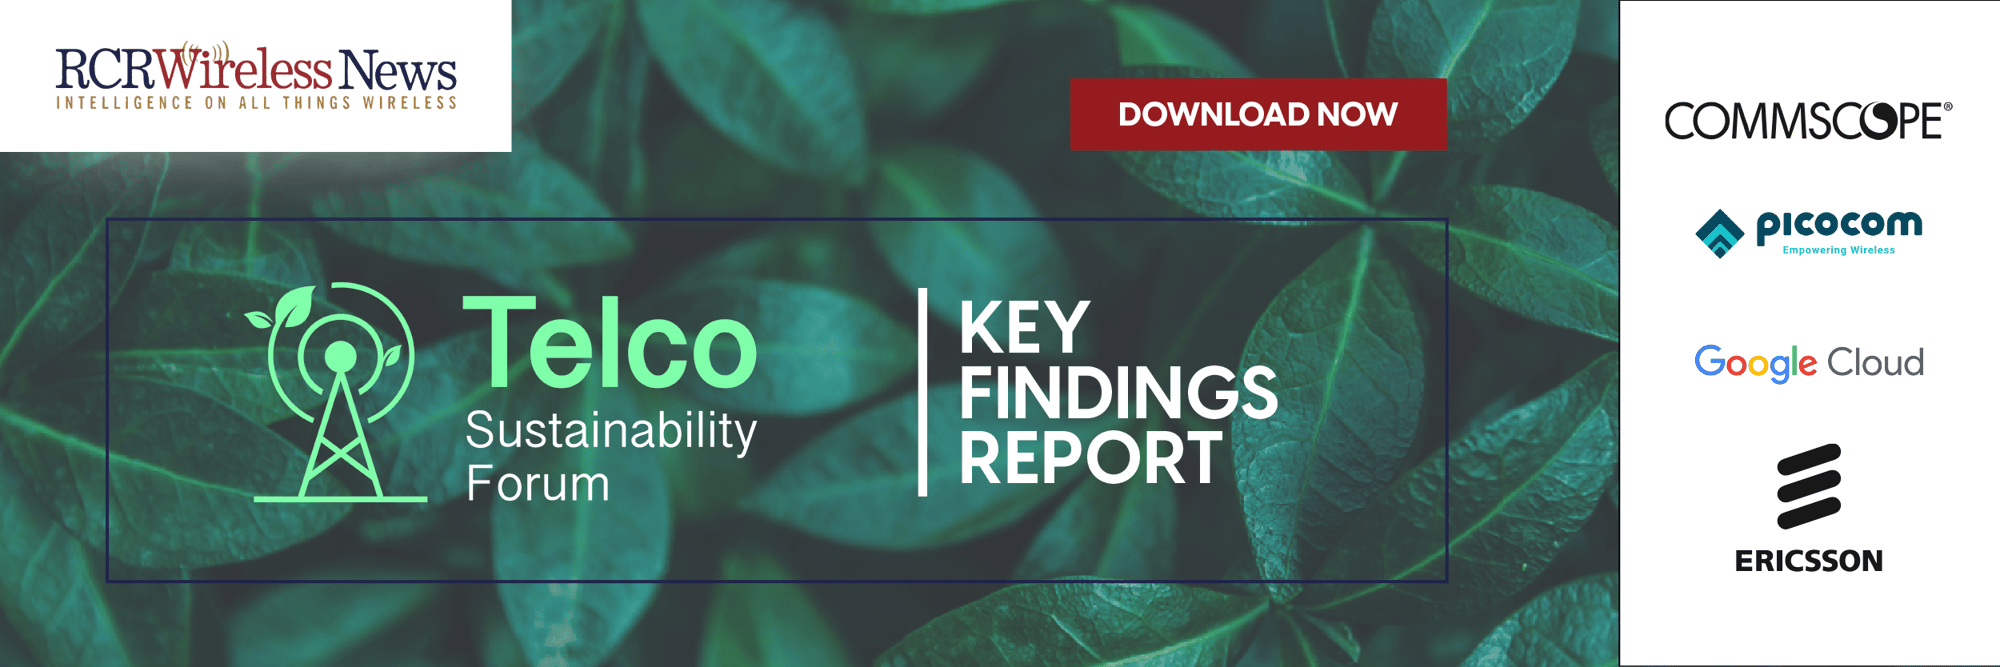 ARD0065_-_Telco_Sustainability_Key_Findings_Report_&_Banners_DownloadNow-600x200